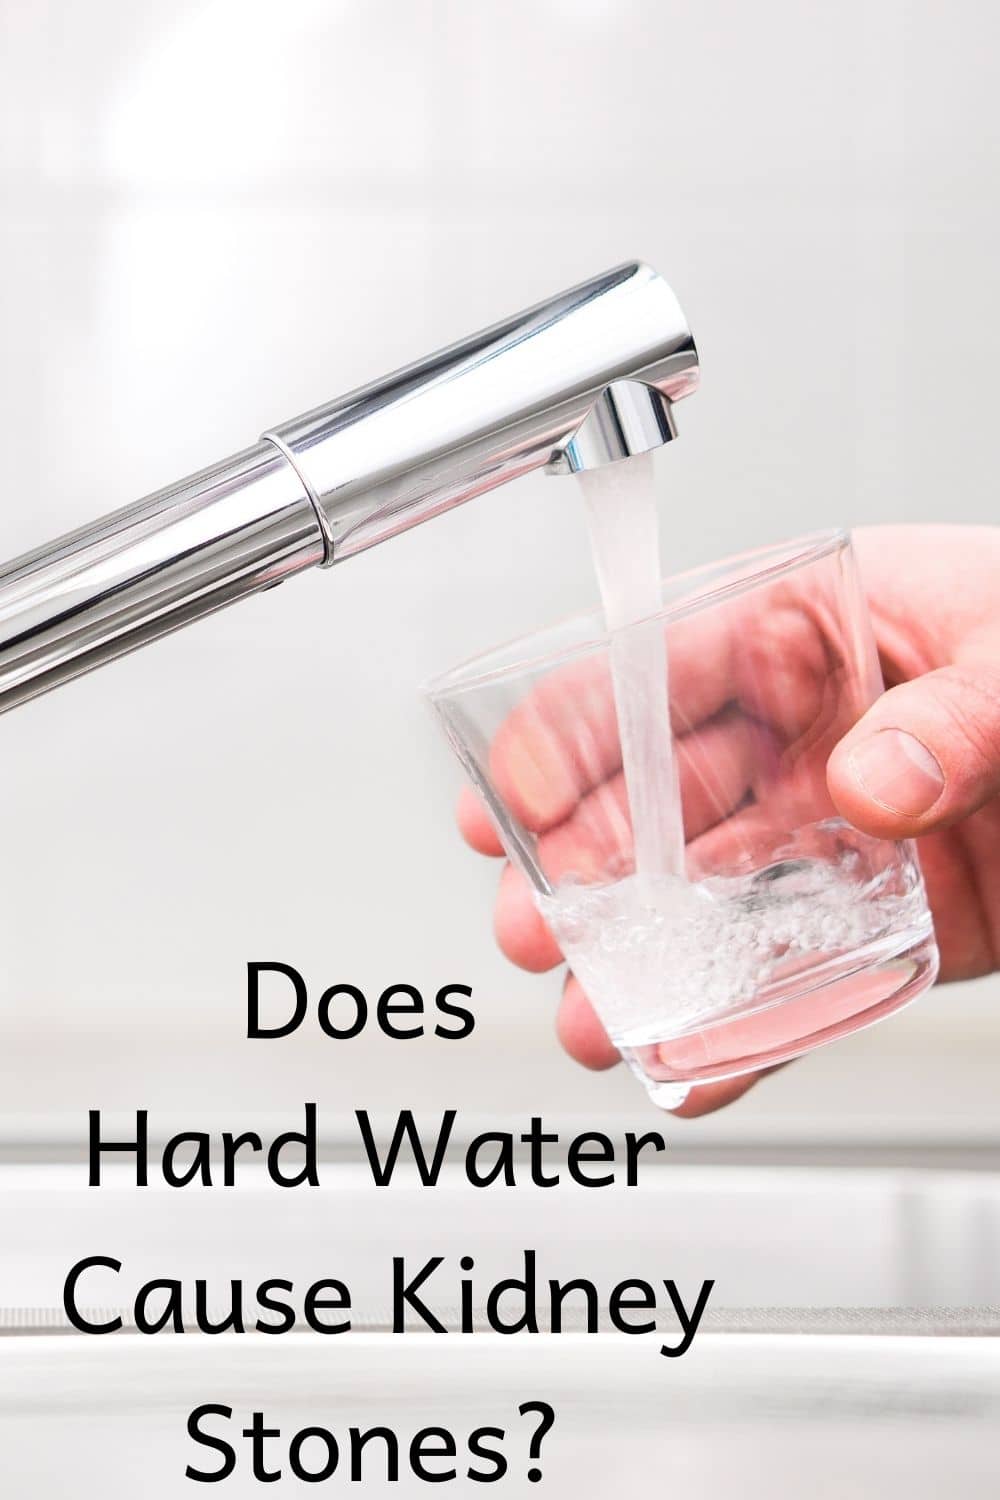 Does Hard Water Cause Kidney Stones?